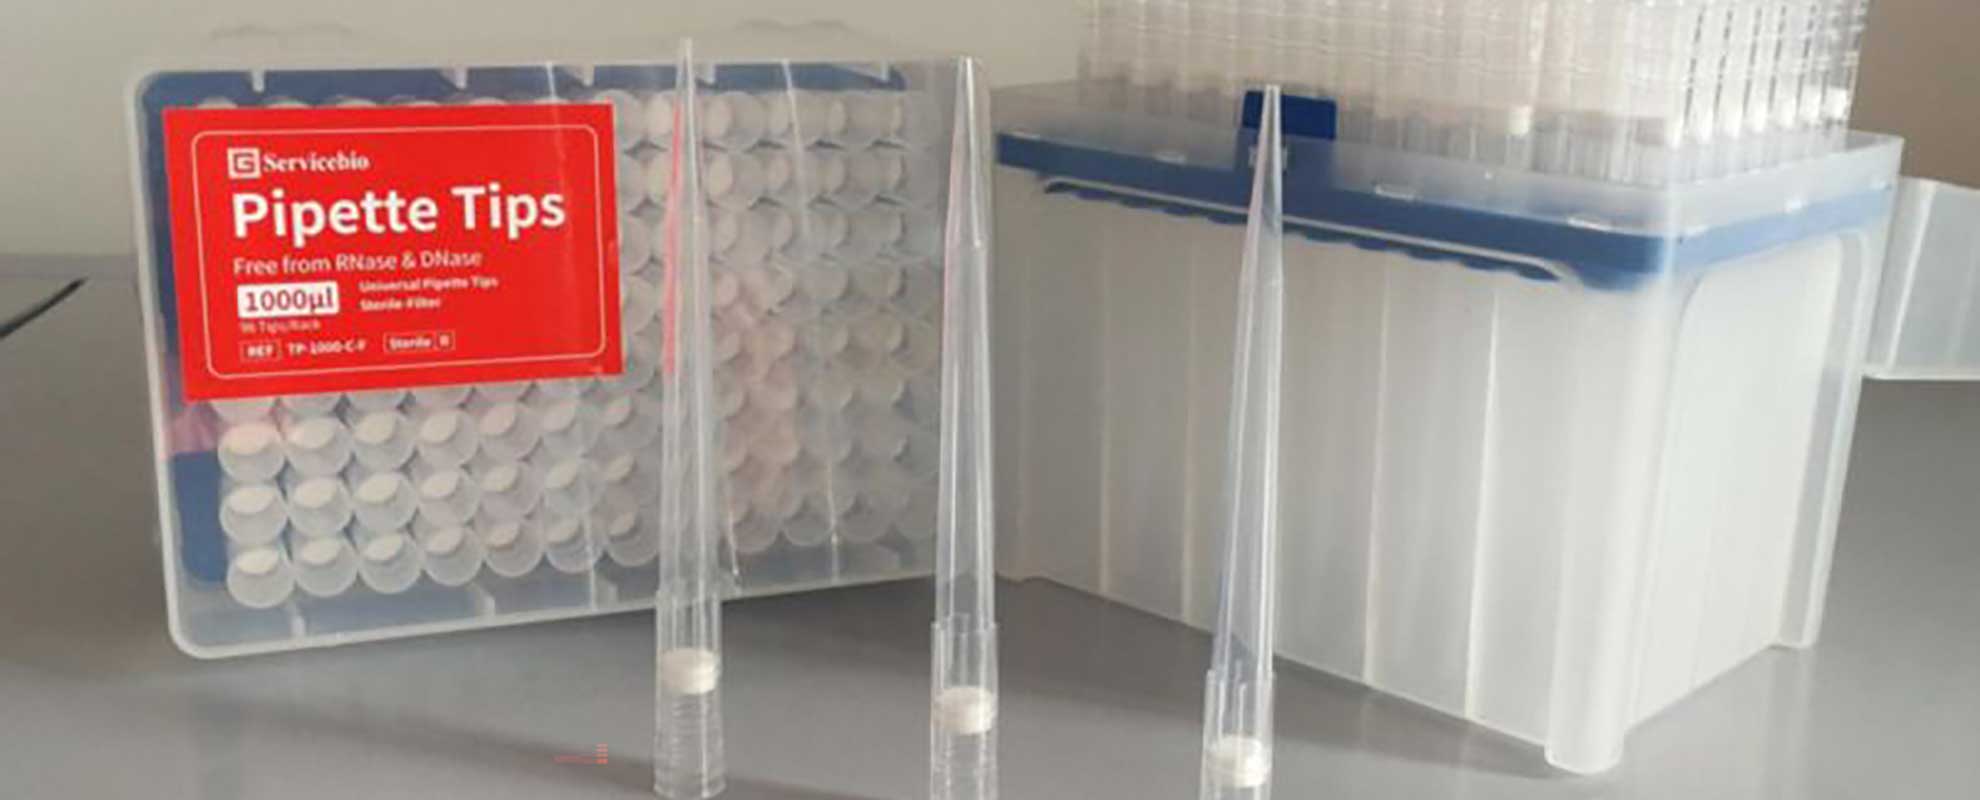 Compatible pipette tips